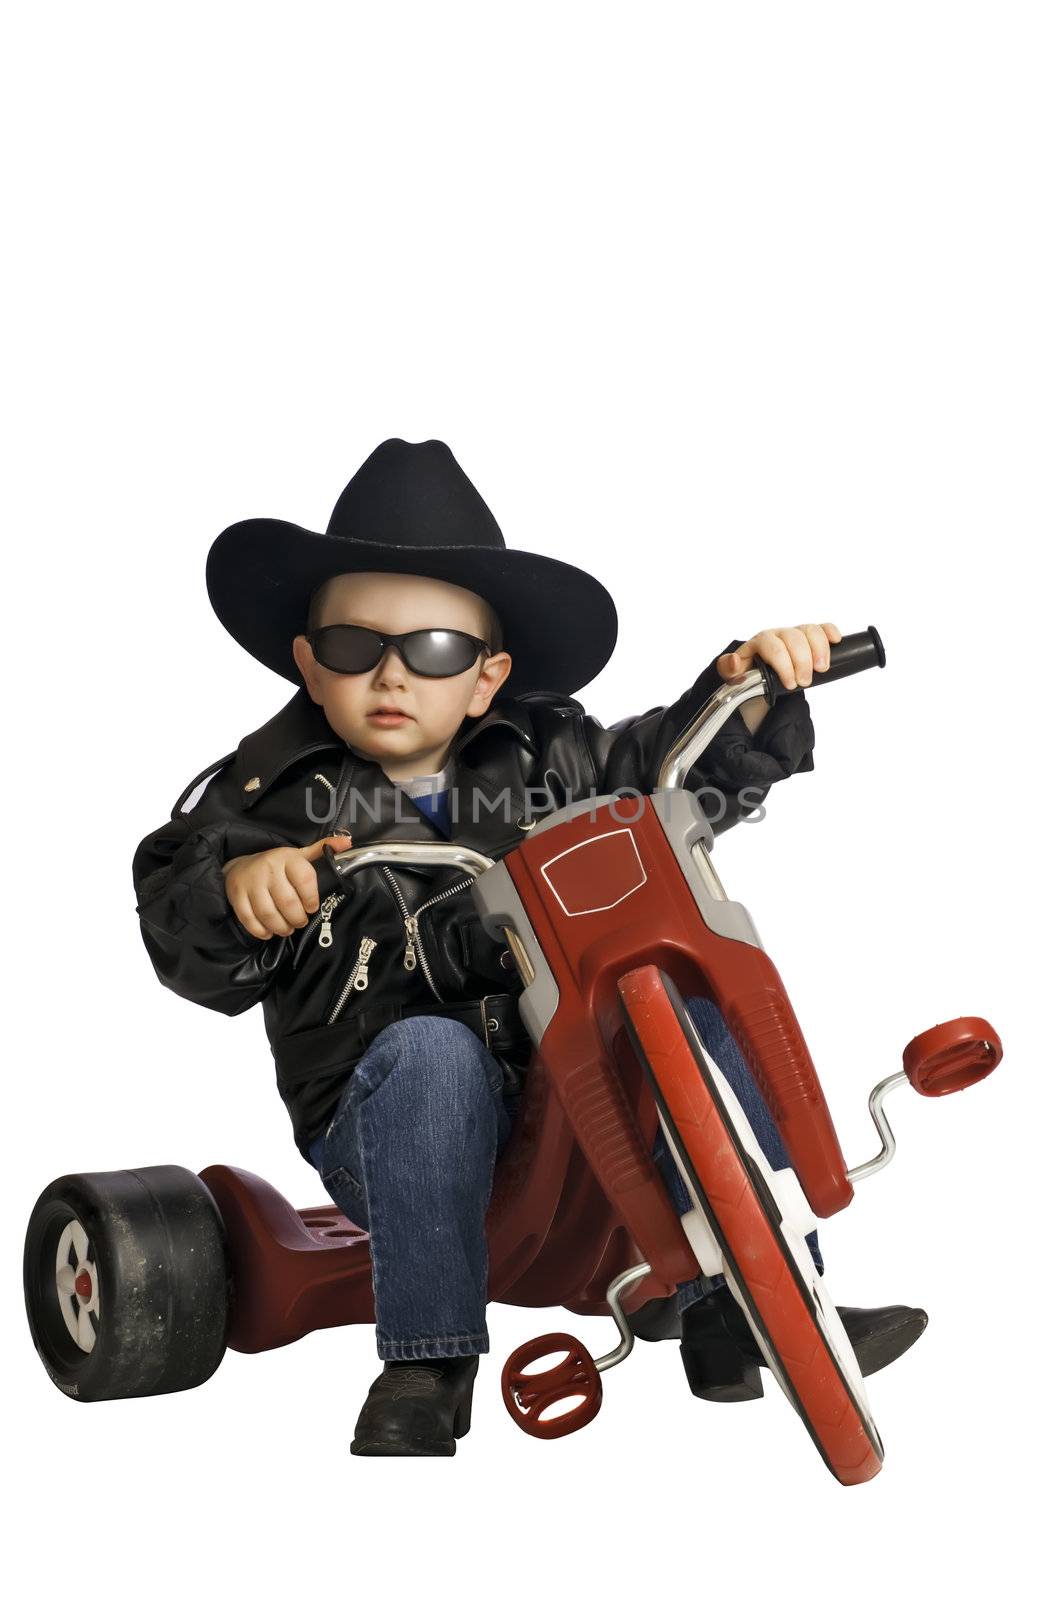 Two year old baby boy playing like a biker on his tricycle